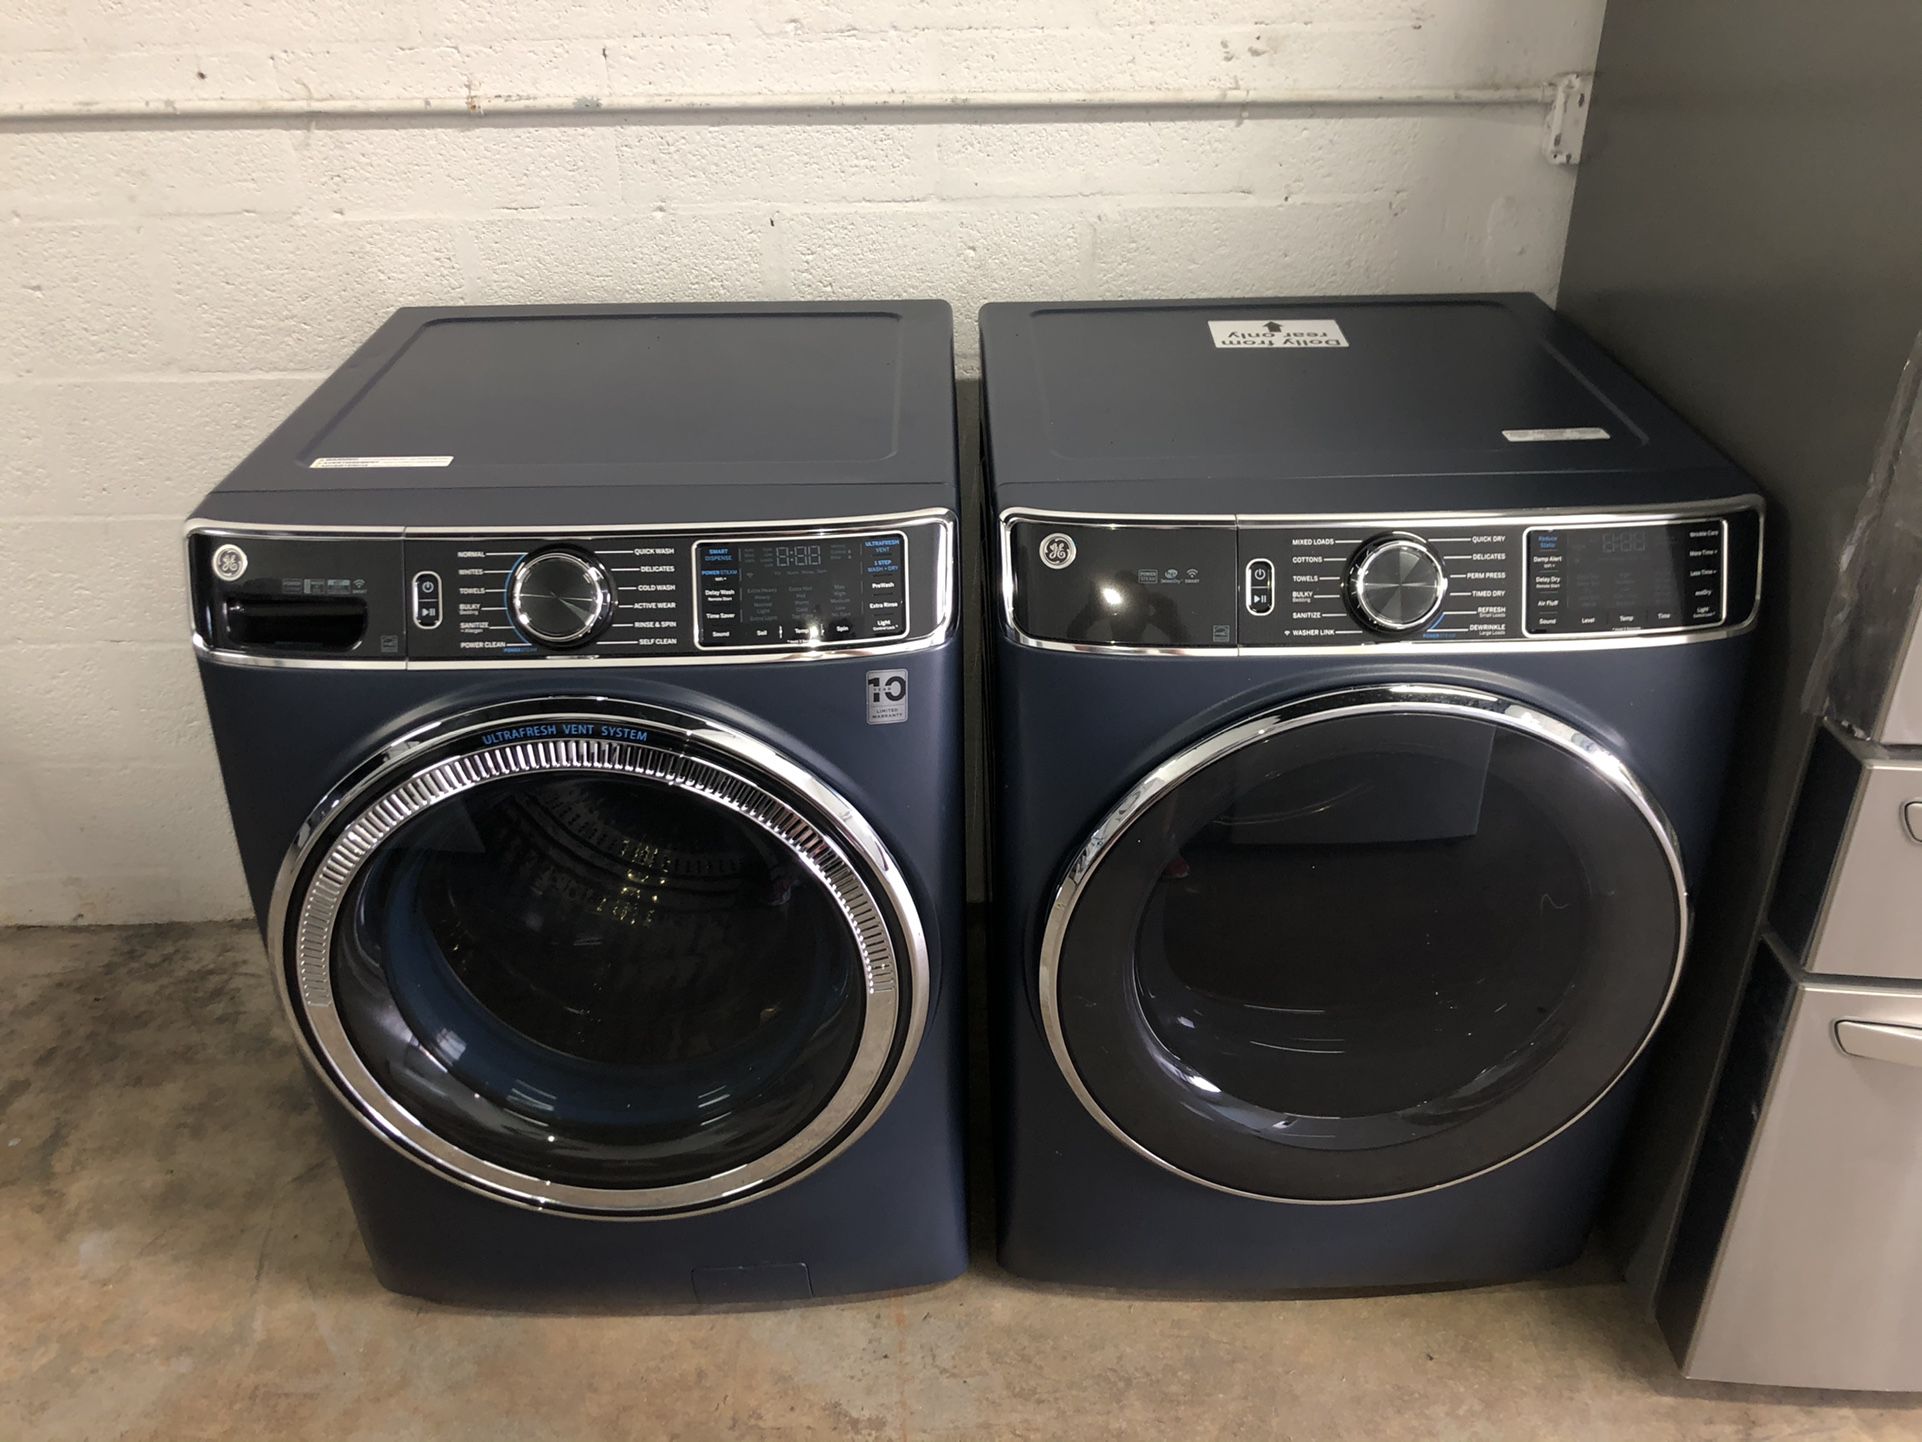 BRAND NEW GE WASHER AND DRYER LARGE CAPACITY 29” WIDE